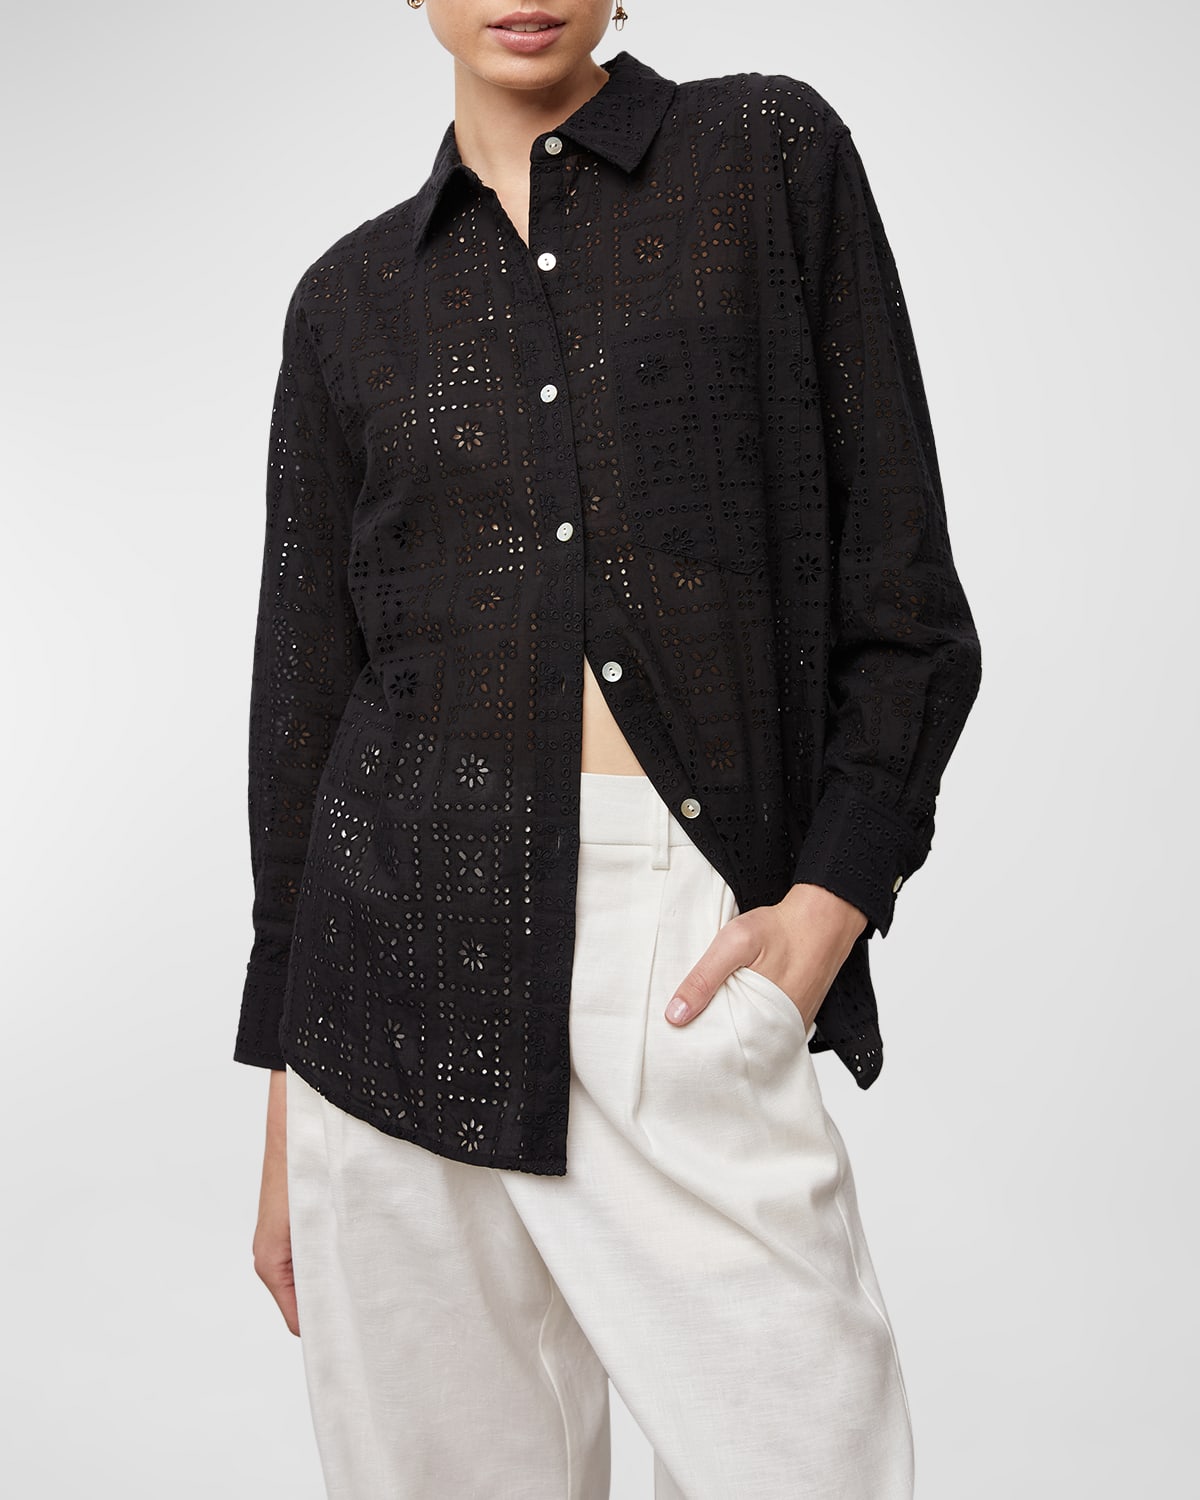 Arlo Eyelet-Embroidered Button-Front Shirt